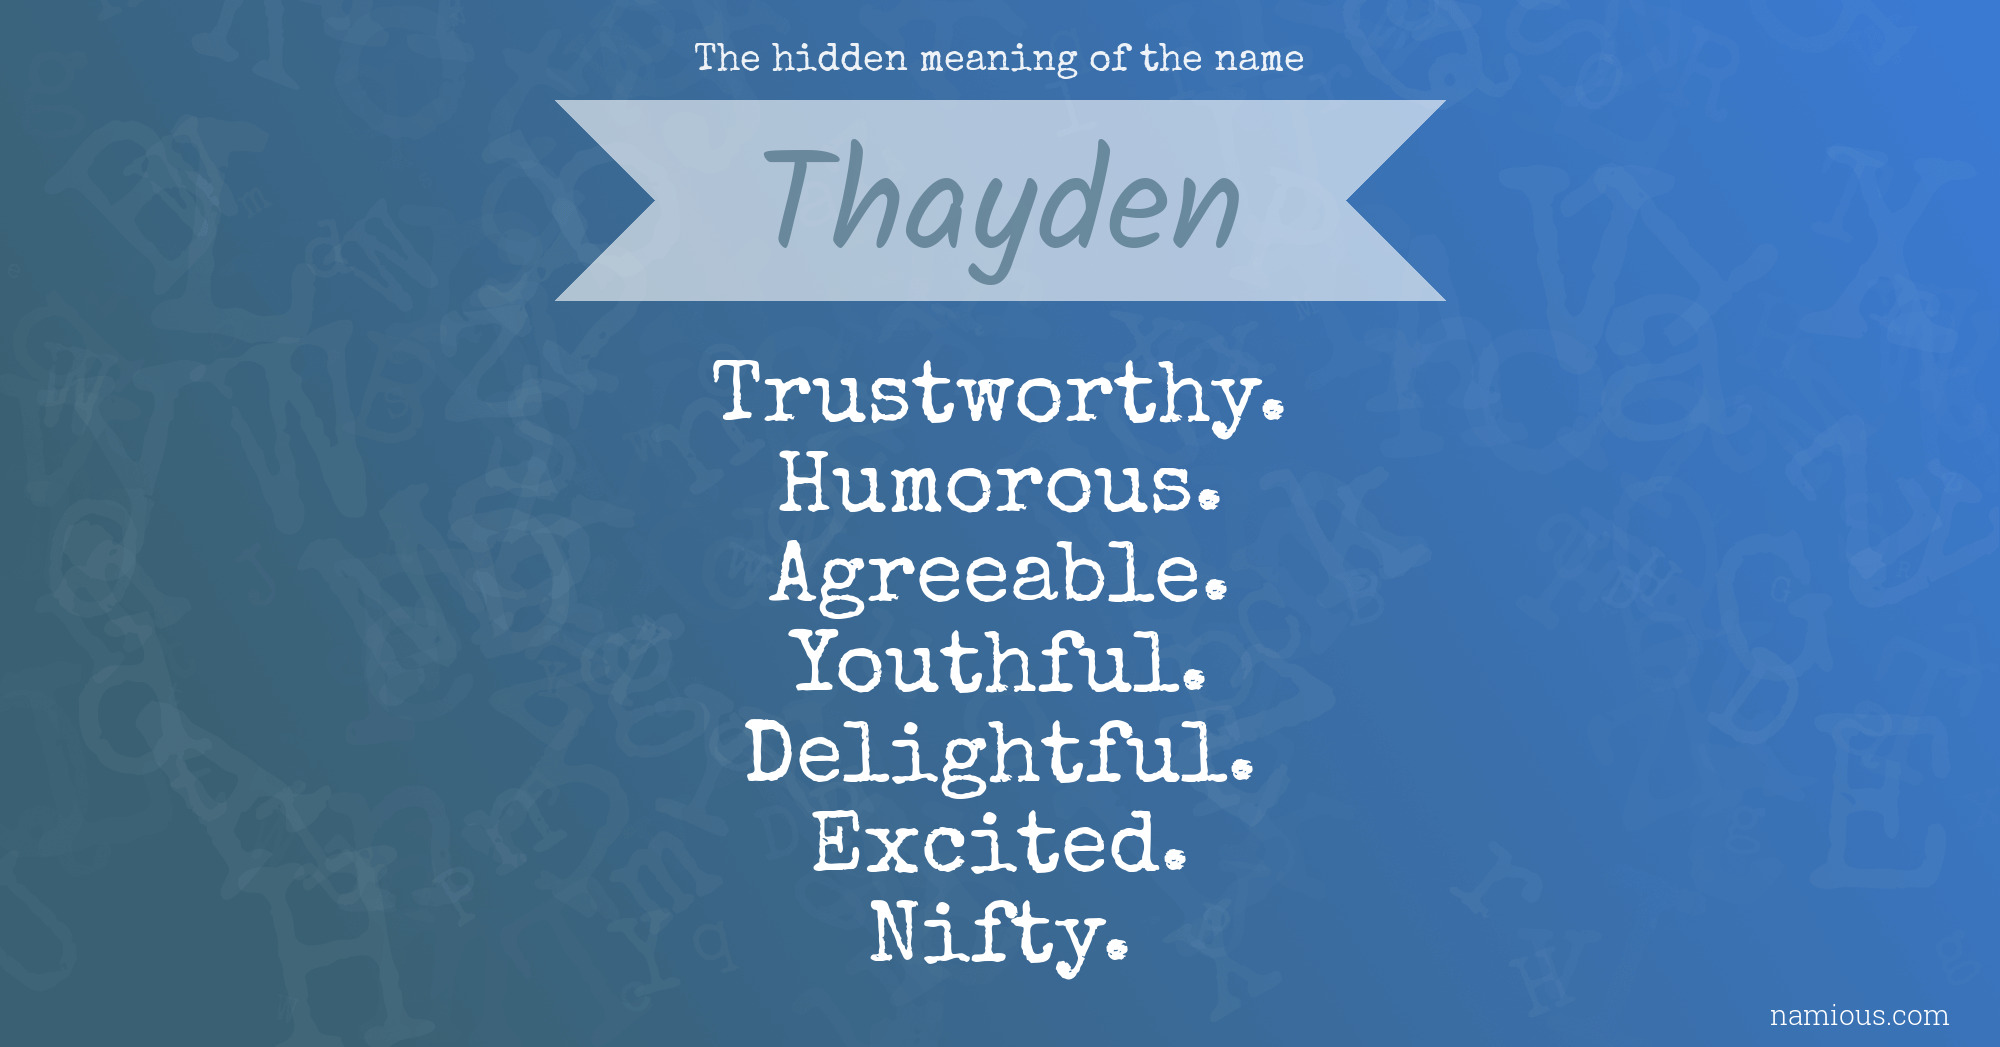 The hidden meaning of the name Thayden